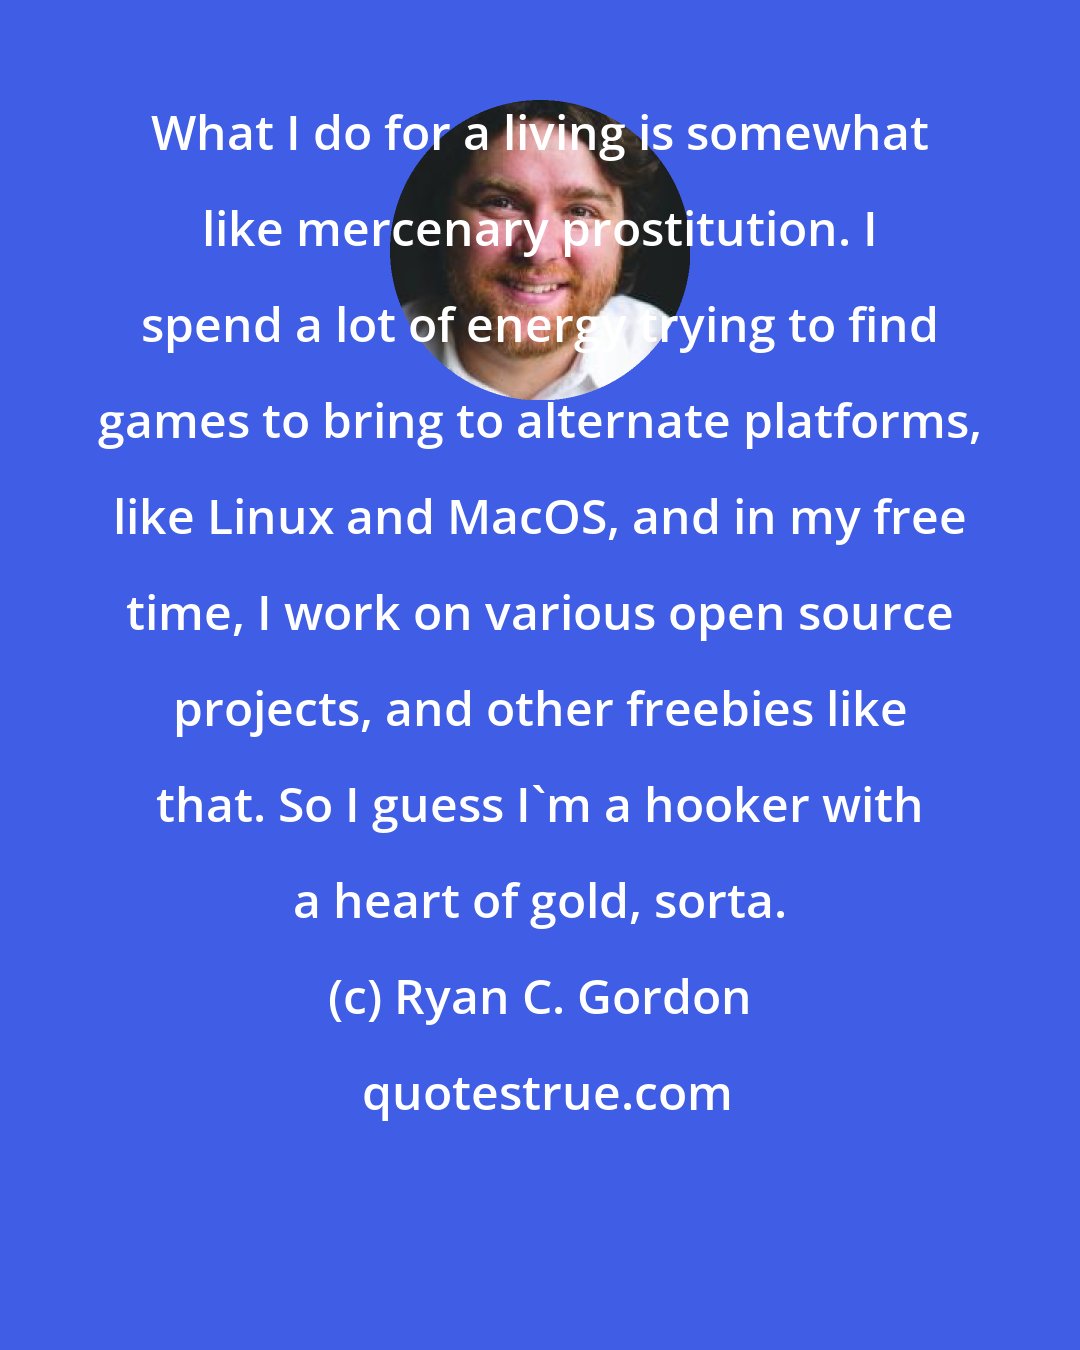 Ryan C. Gordon: What I do for a living is somewhat like mercenary prostitution. I spend a lot of energy trying to find games to bring to alternate platforms, like Linux and MacOS, and in my free time, I work on various open source projects, and other freebies like that. So I guess I'm a hooker with a heart of gold, sorta.